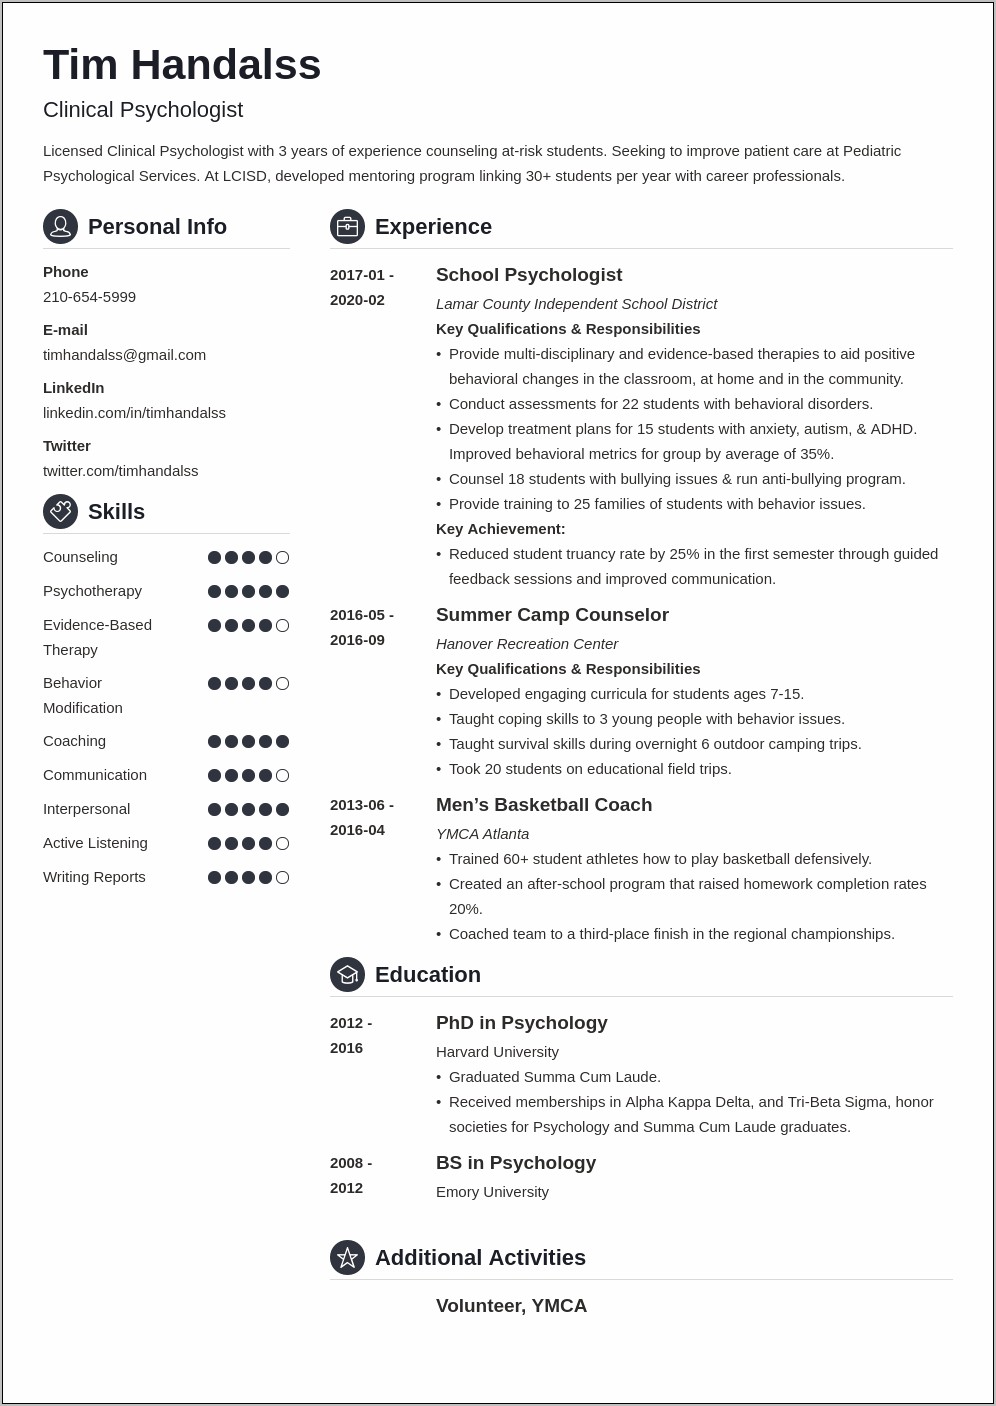 Resume Template Graduate Student Clinical Psychology